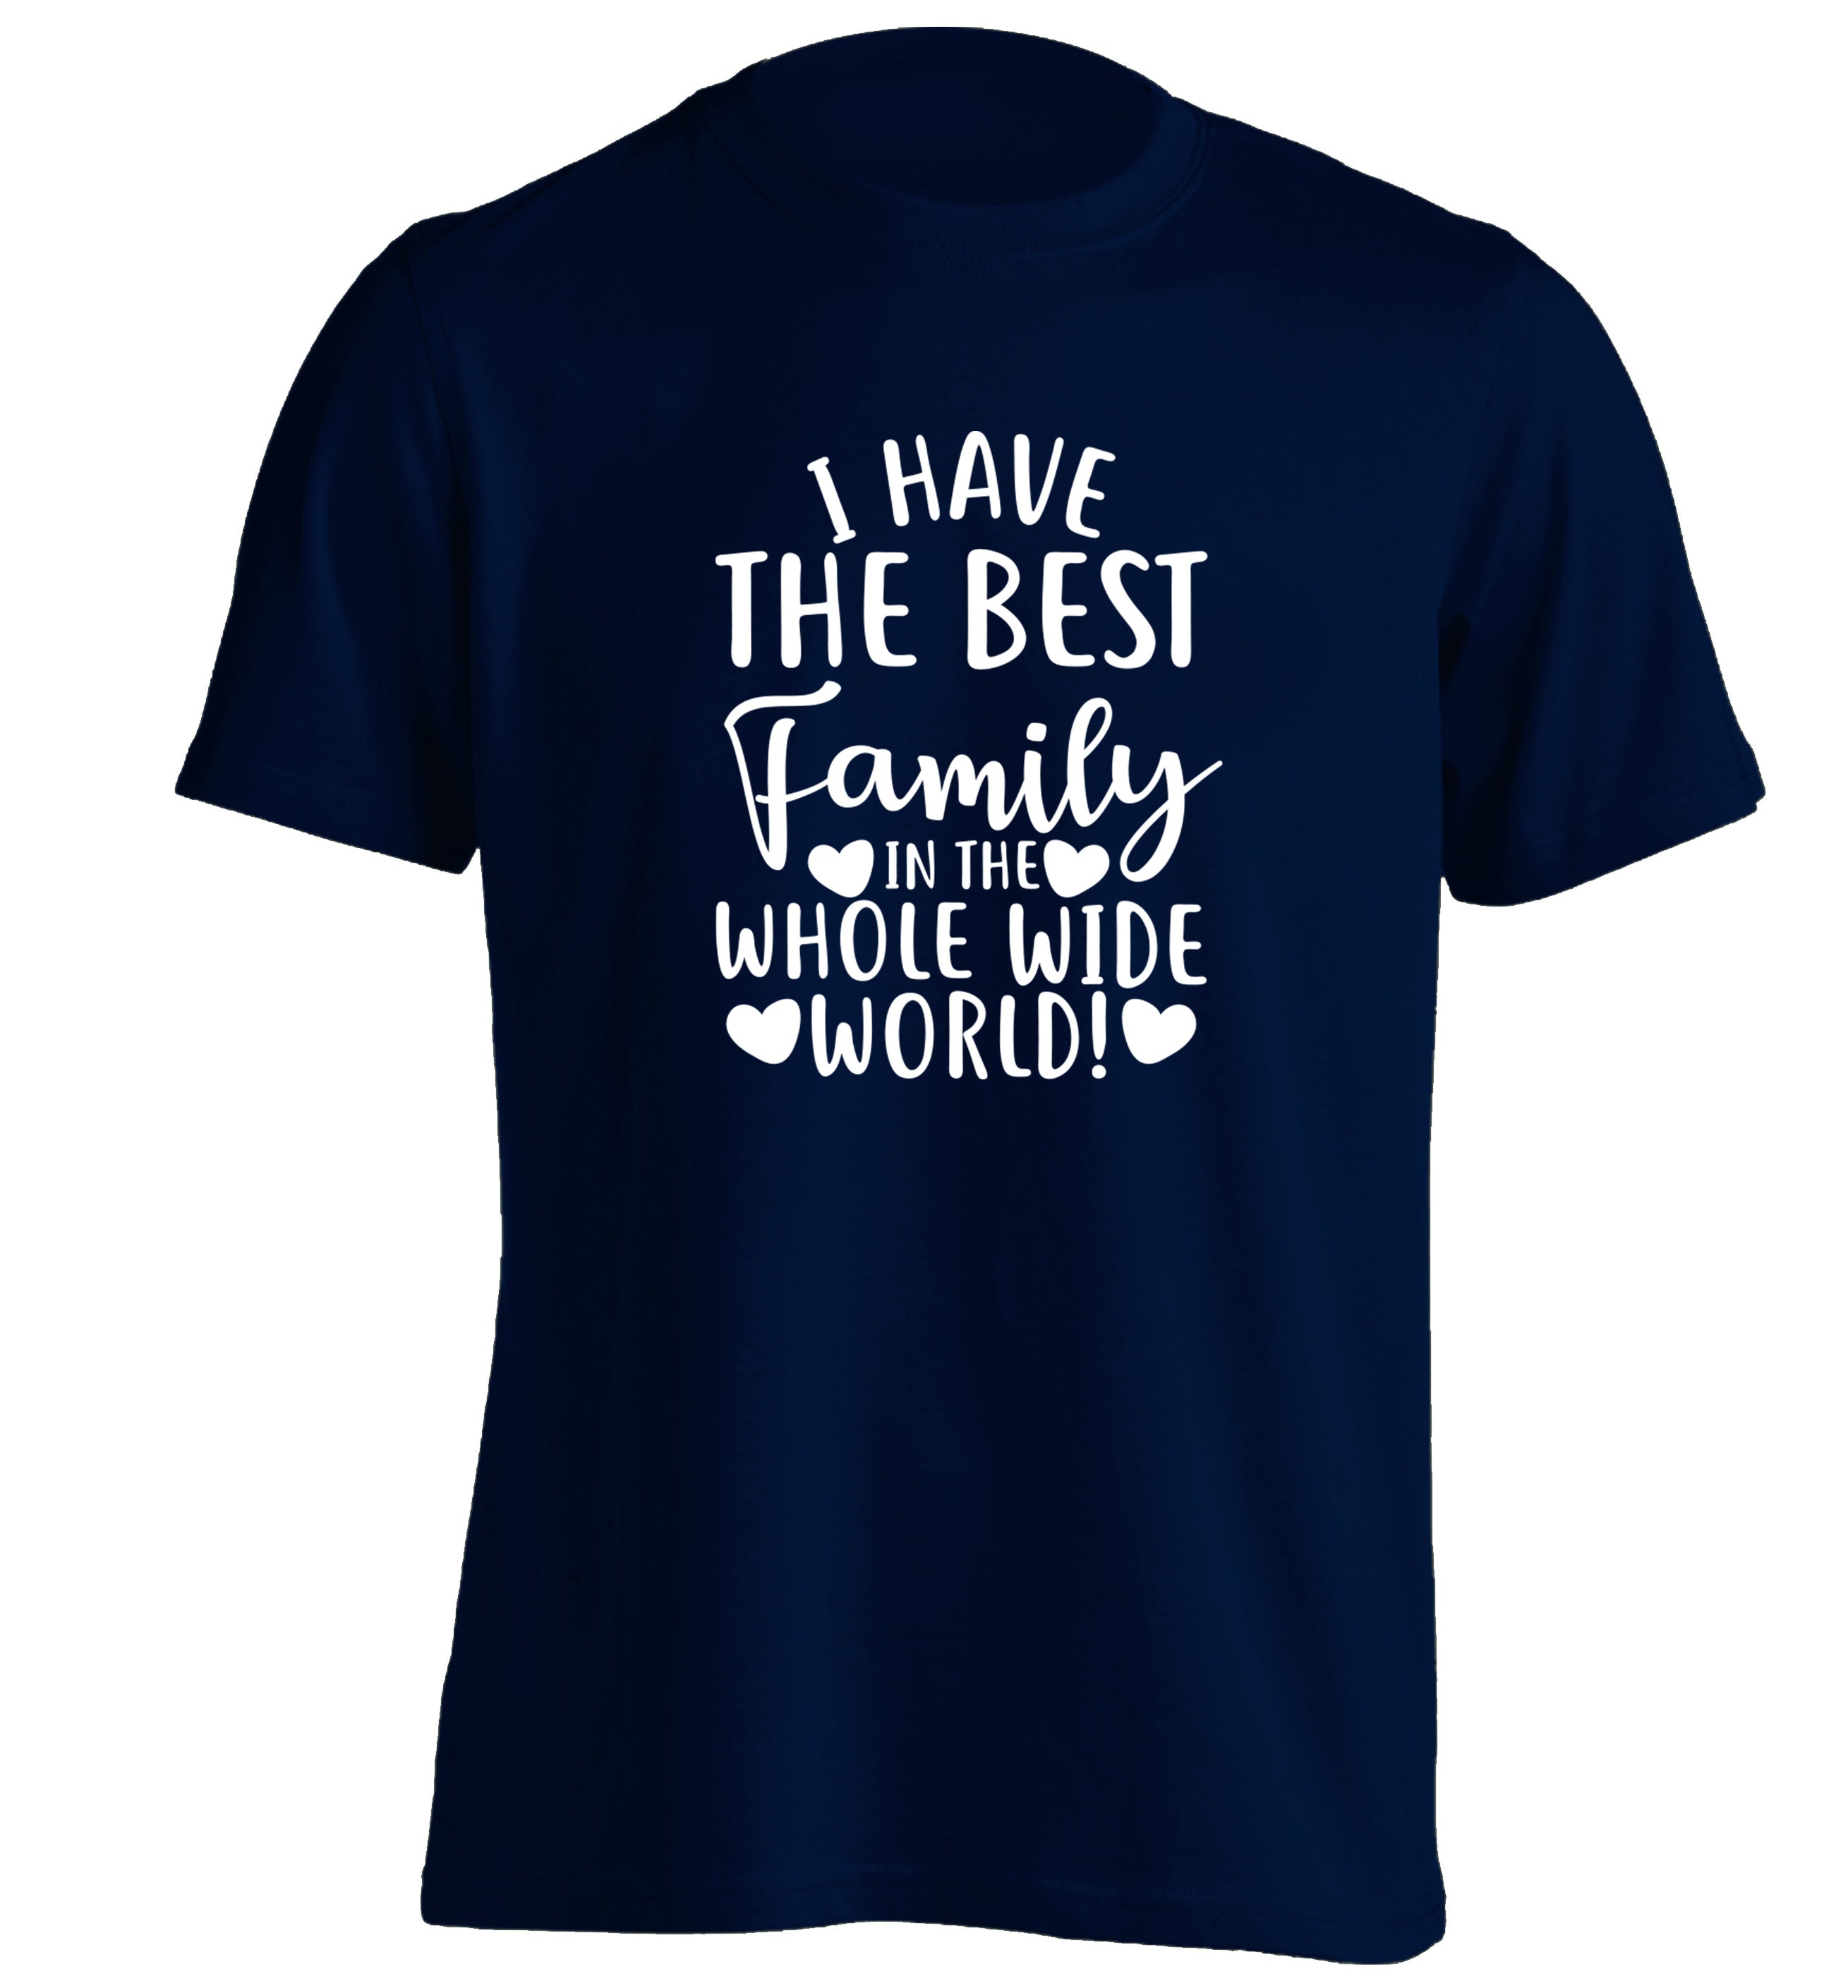 i have the best family in the world tshirt